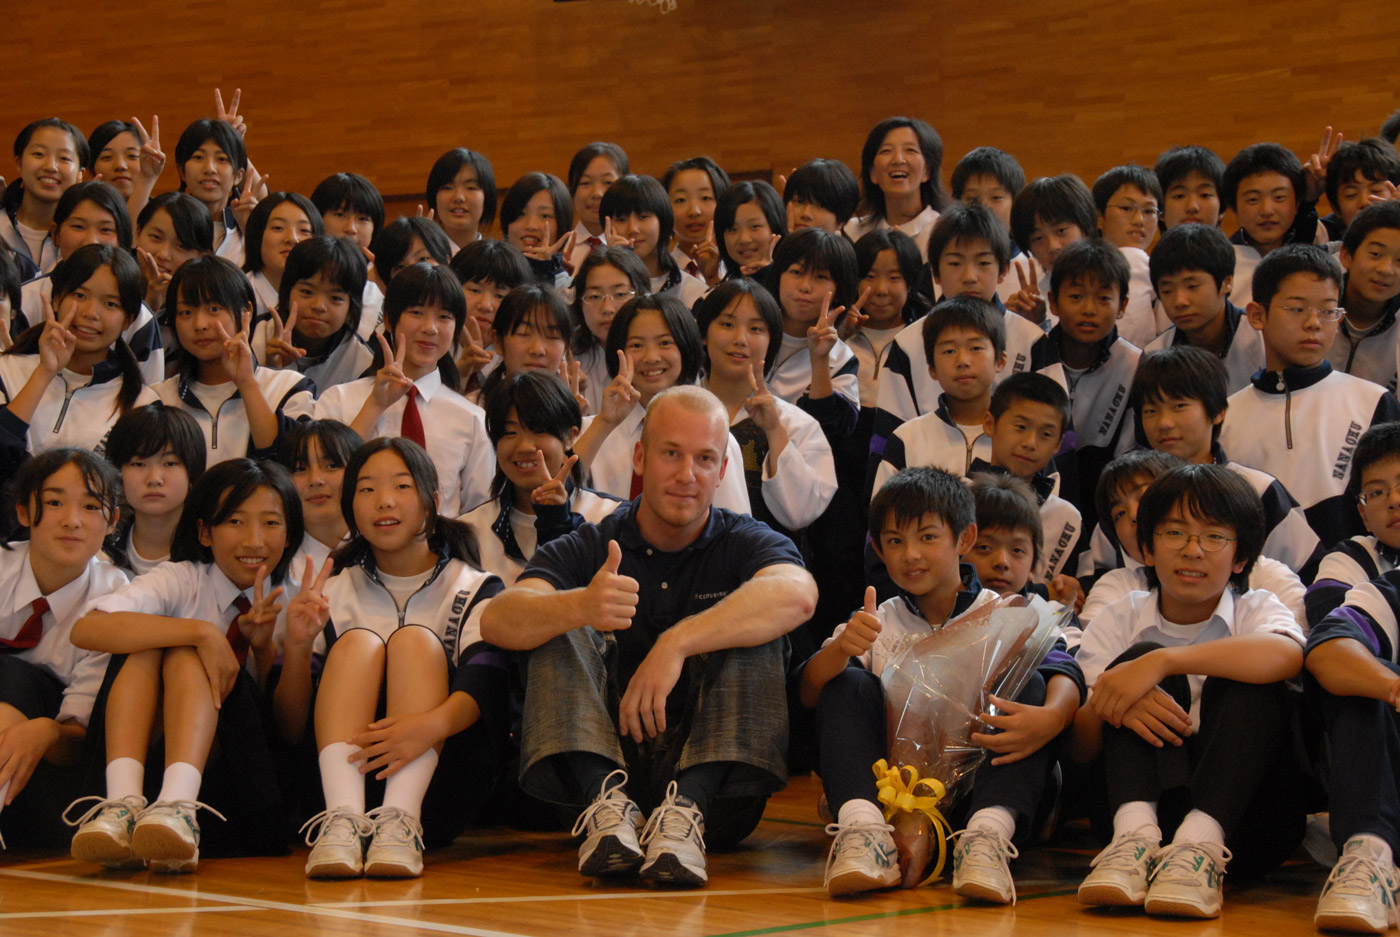 Crédit: The Japan Exchange and Teaching Programme